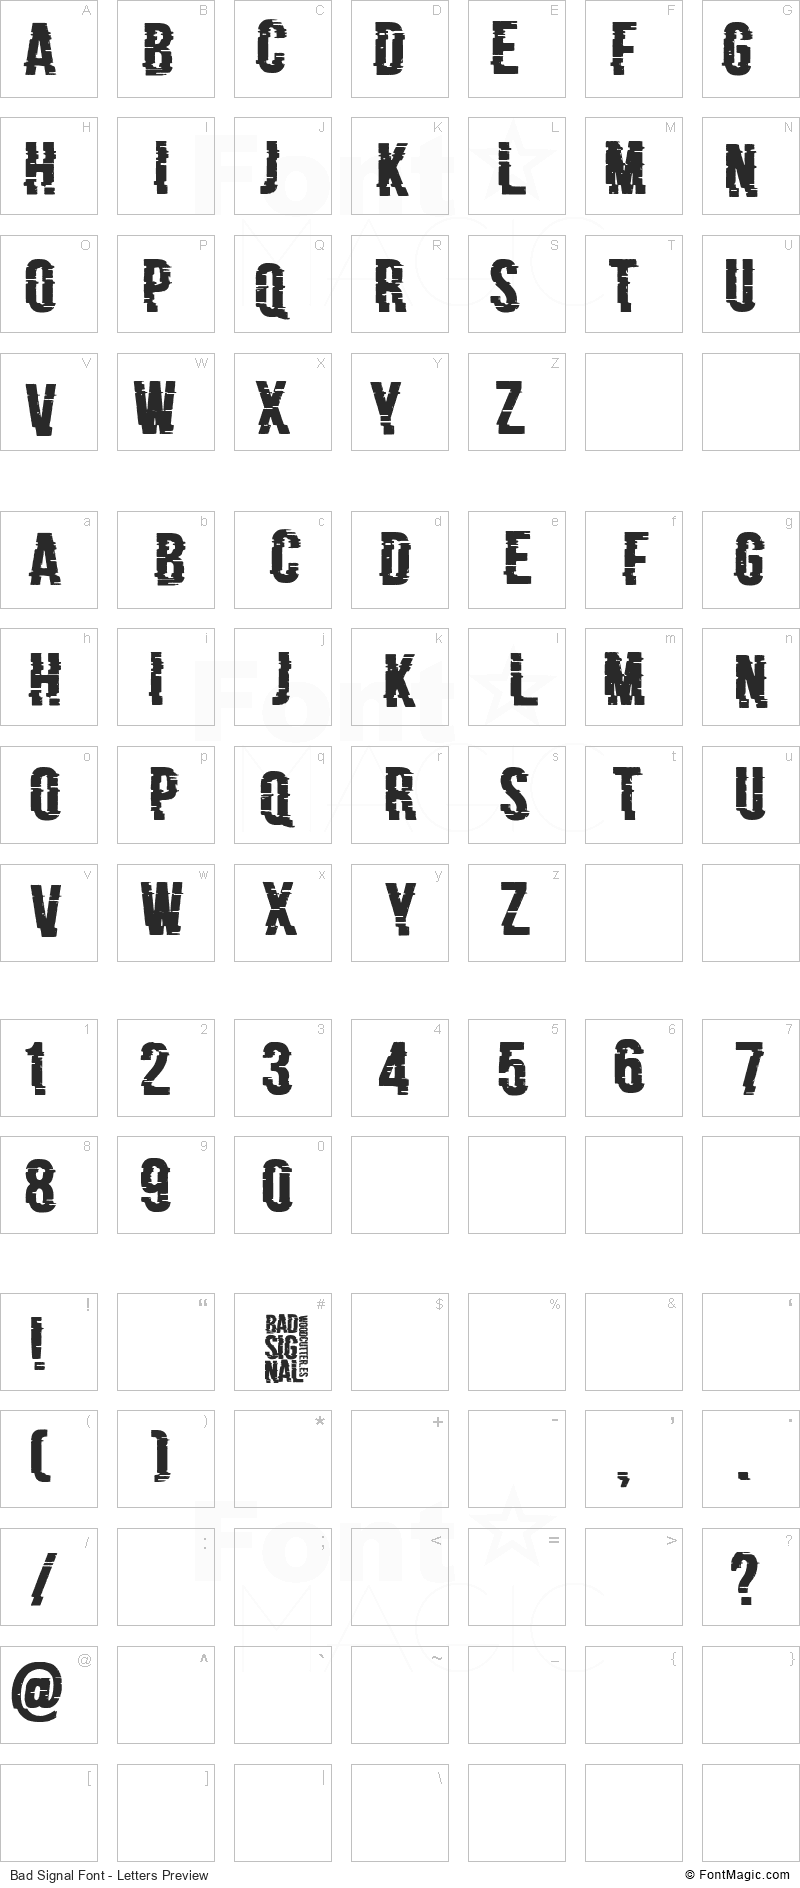 Bad Signal Font - All Latters Preview Chart